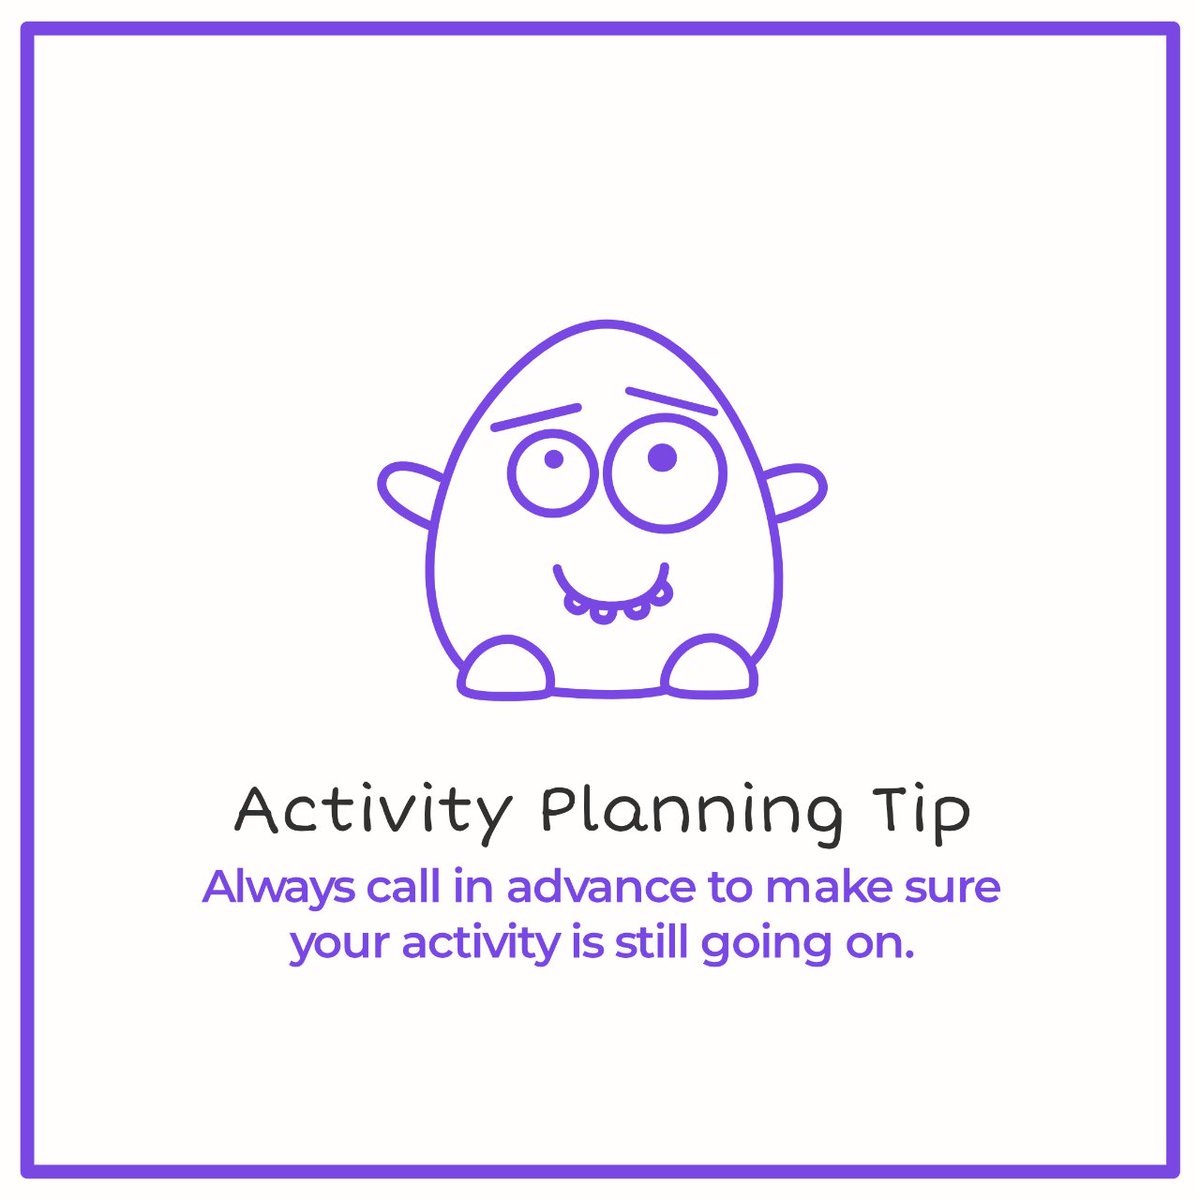 Especially when you are traveling or visiting a new venue, or the first time you are doing a certain activity, always confirm your activity is still going on. Nothing is worse than showing up and finding out your plans got cancelled. 

#gather #familyevents #kidevents #events